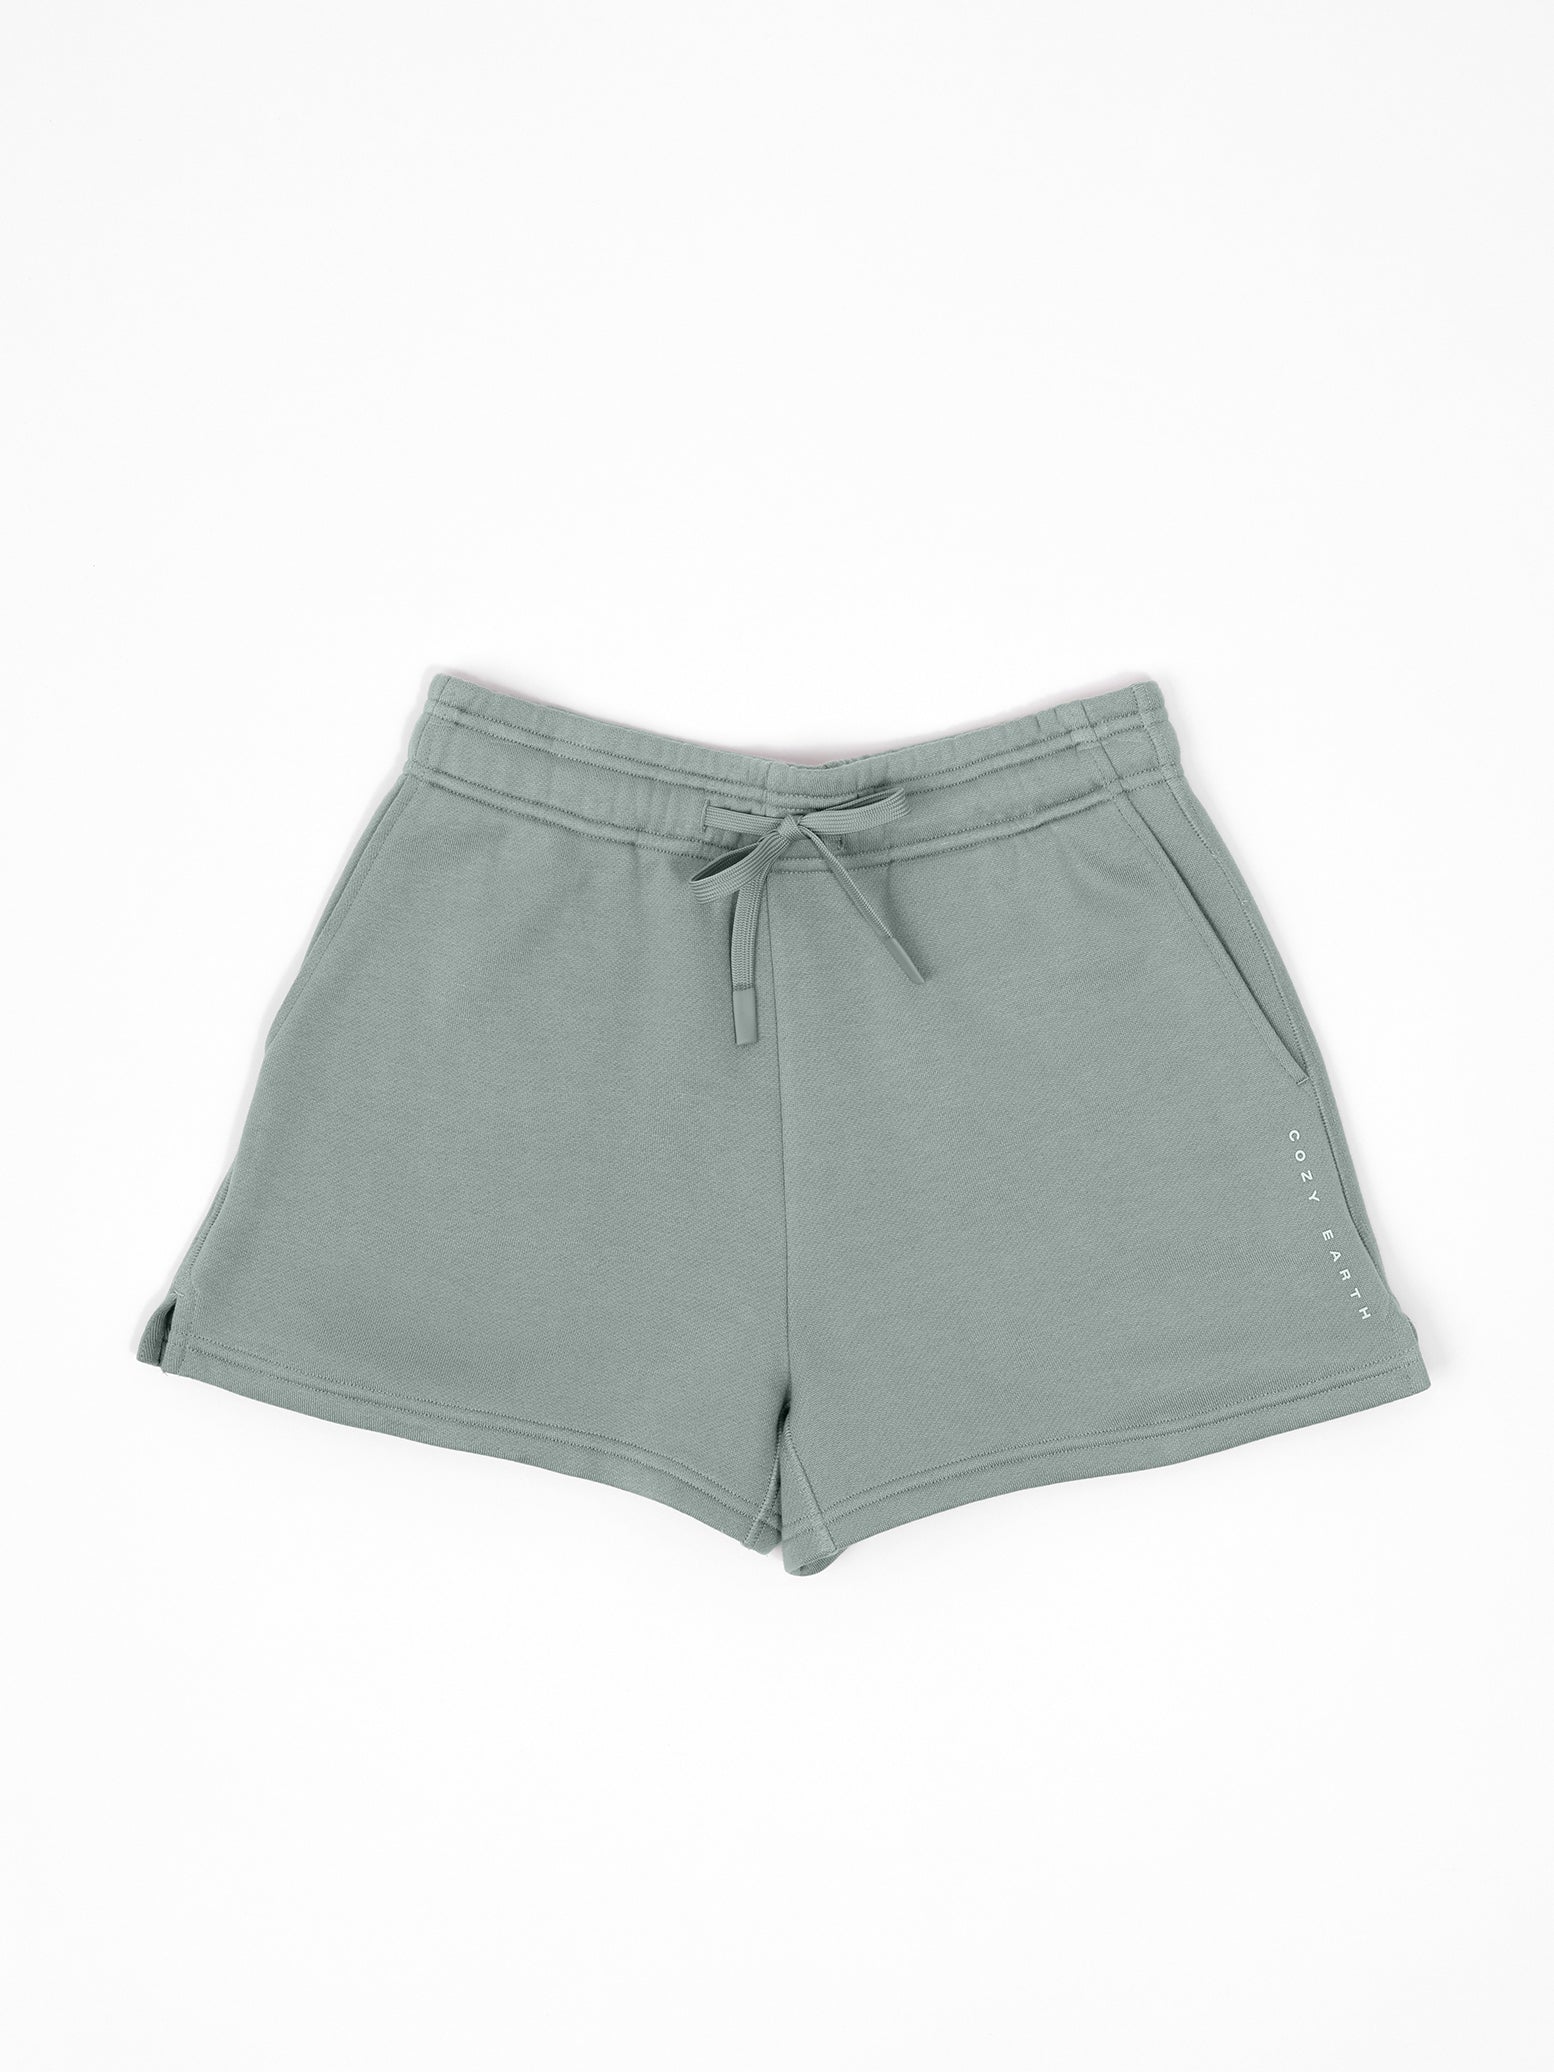 Haze CityScape Shorts. The shorts are laying flat over a background that is white. 